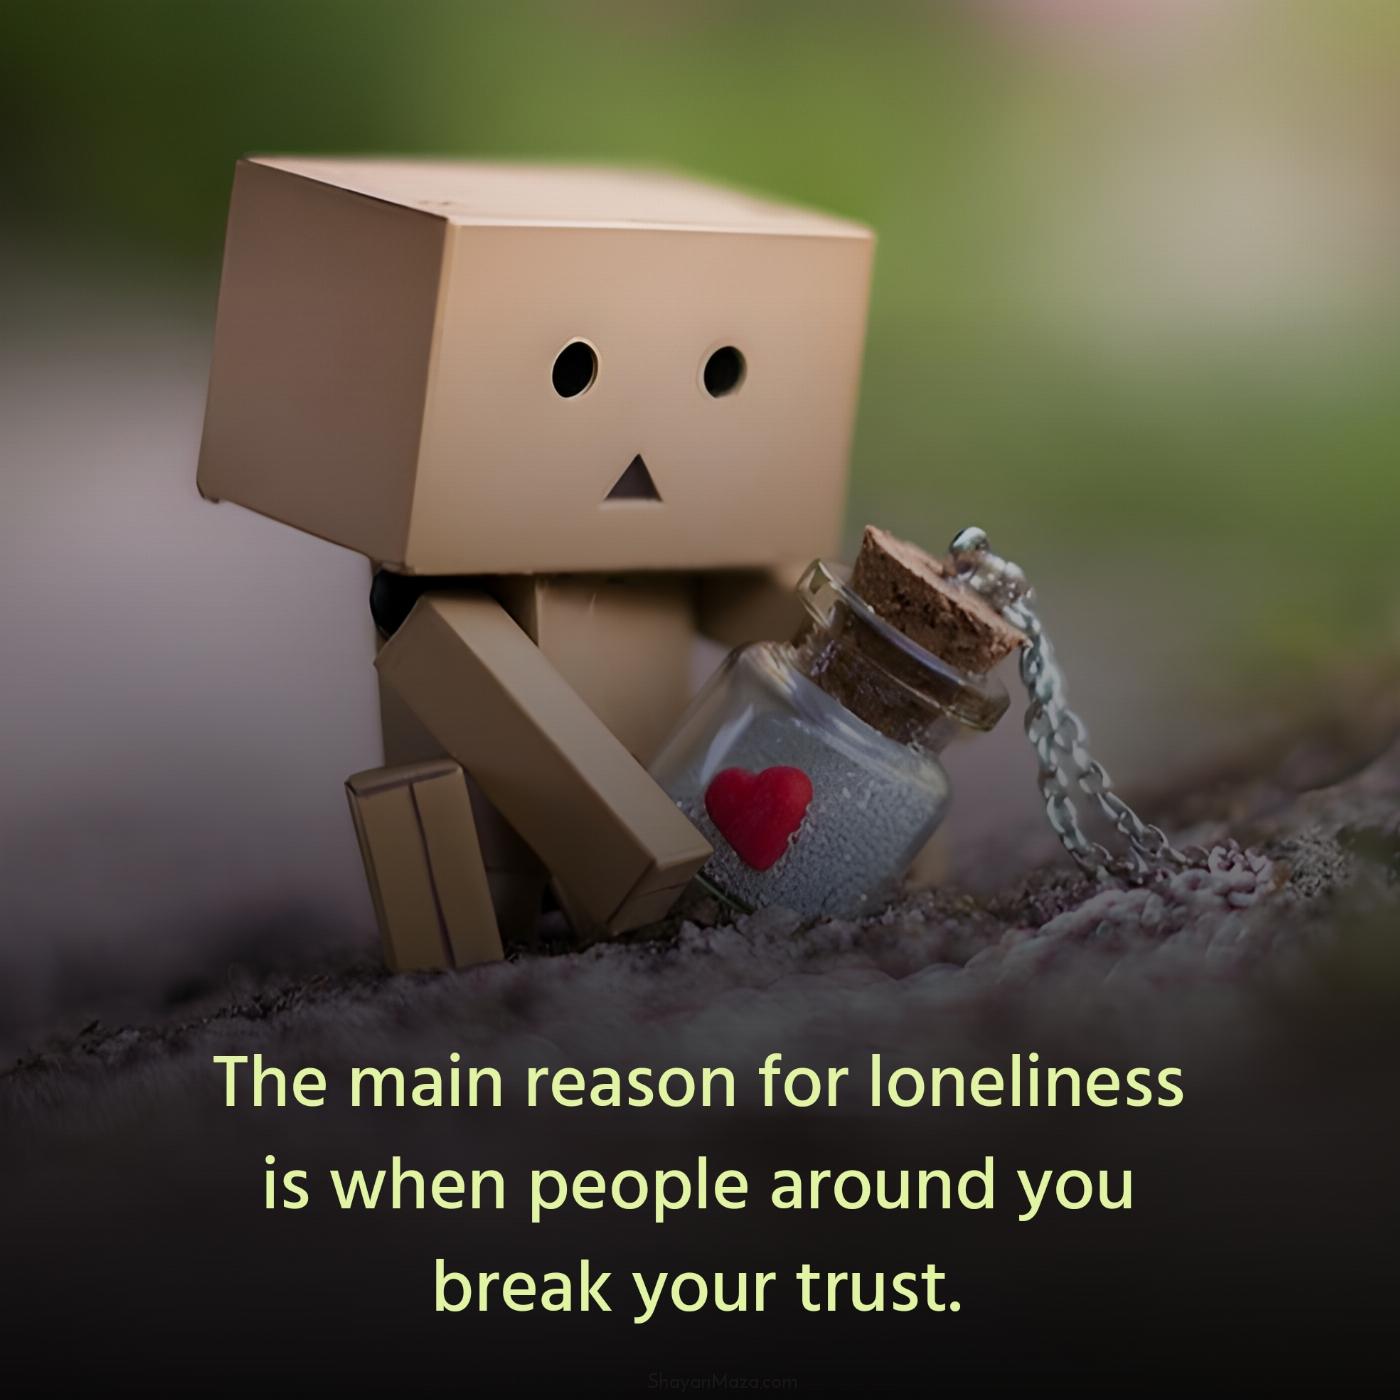 The main reason for loneliness is when people around you